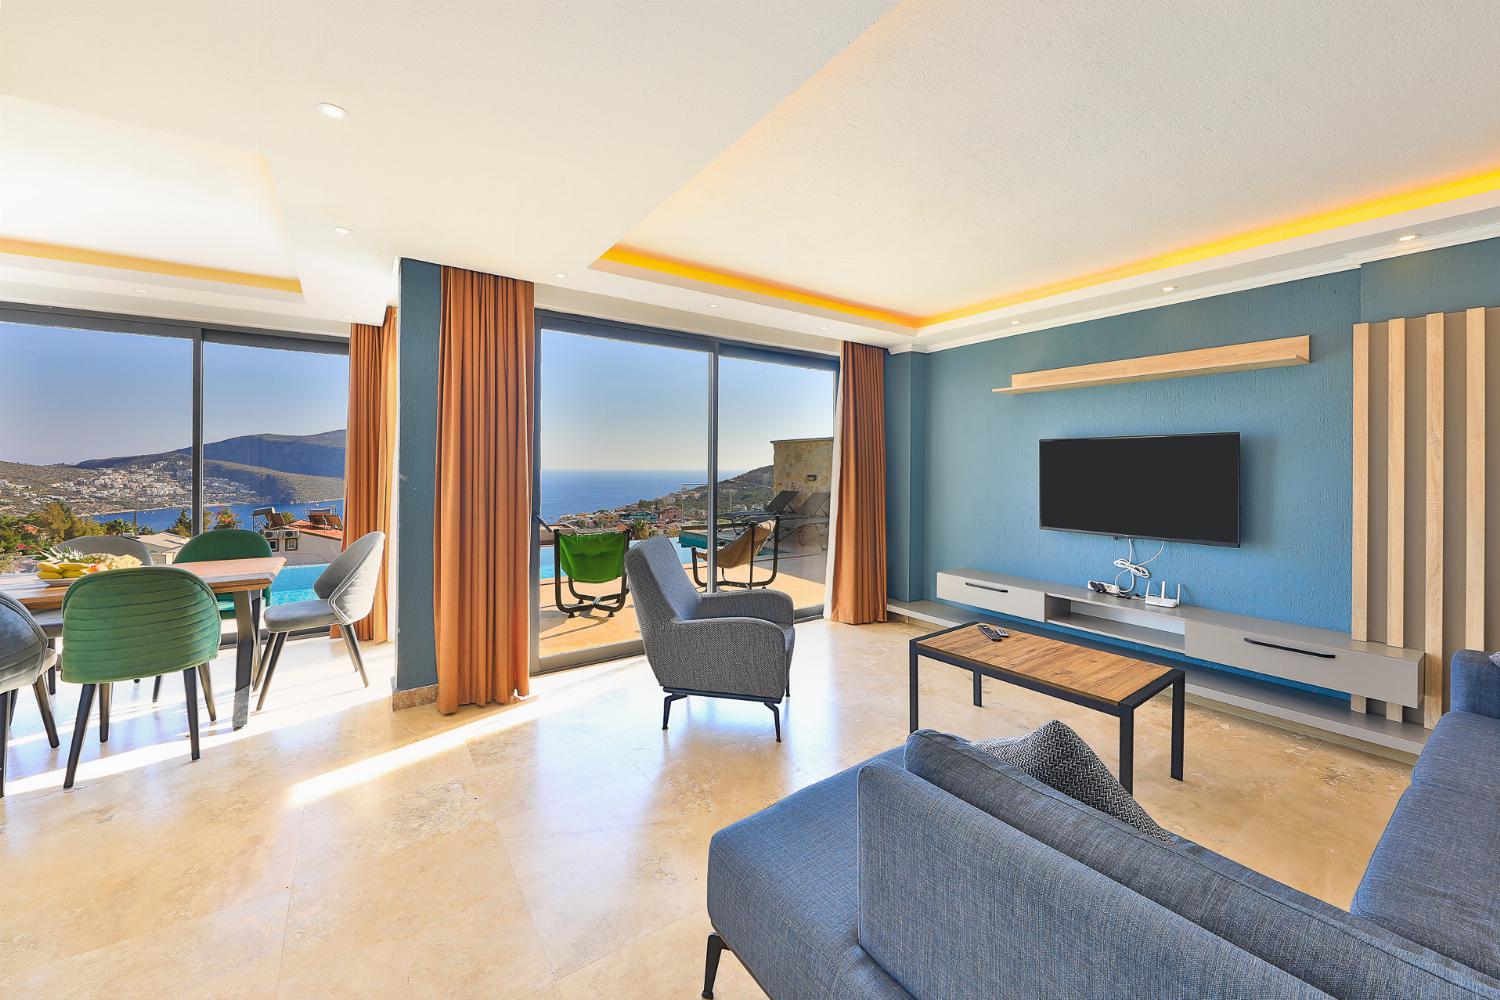 Open-plan living room with sofas, dining areas, WiFi internet, satellite TV, and terrace access with panoramic sea views